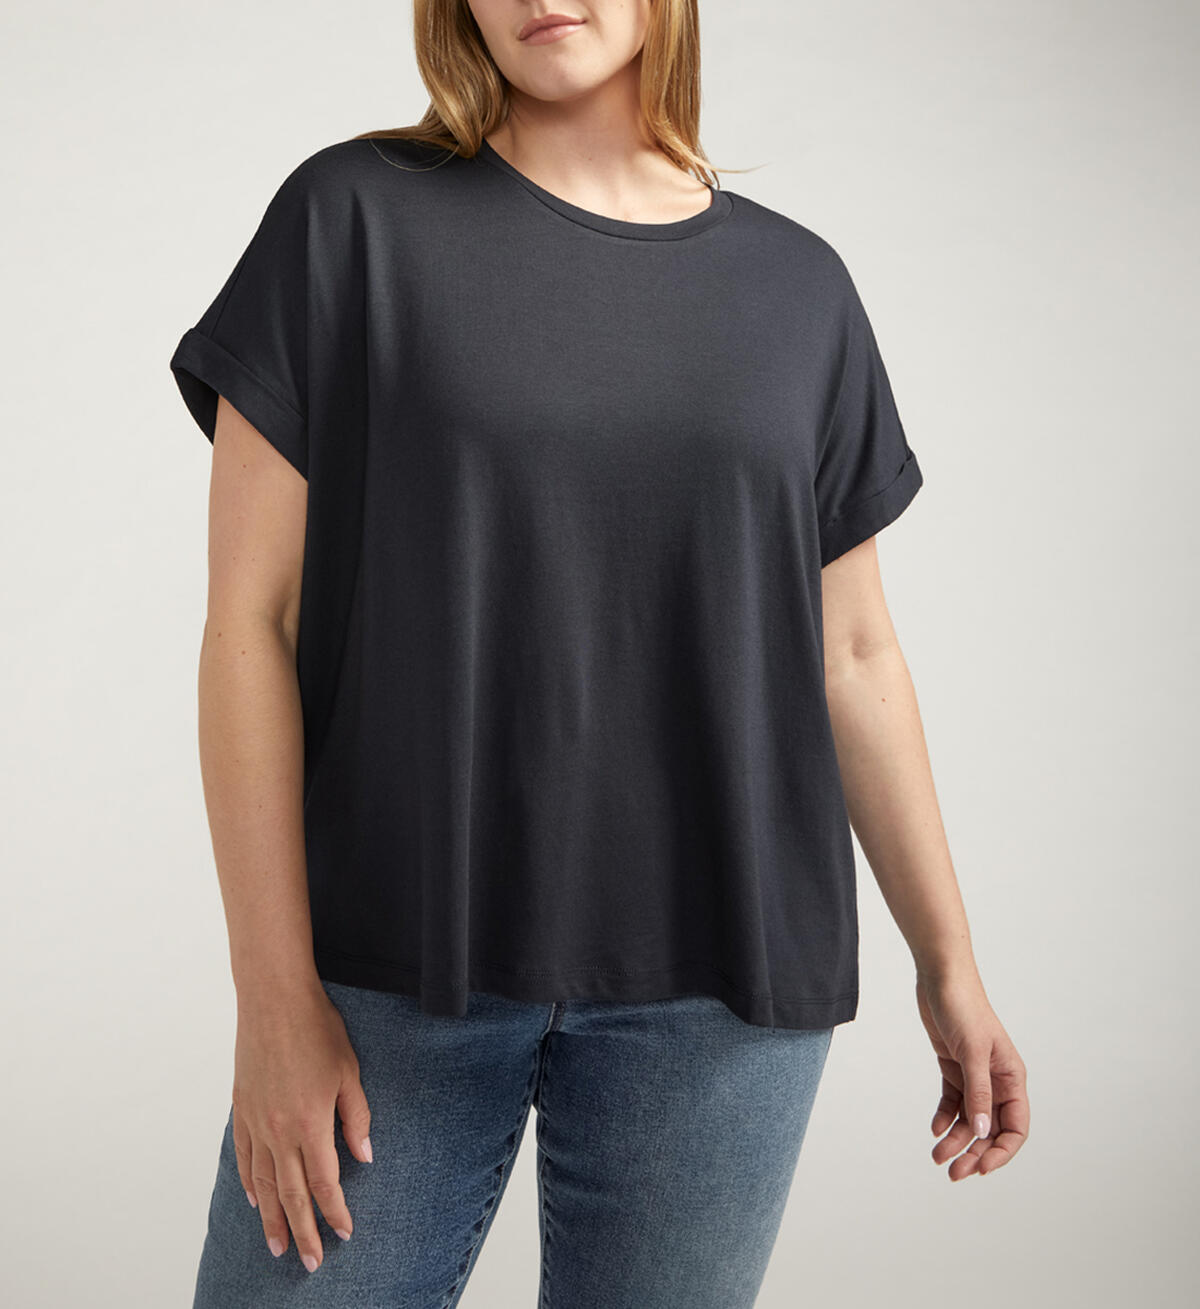 Drapey Luxe Tee Plus Size, , hi-res image number 2